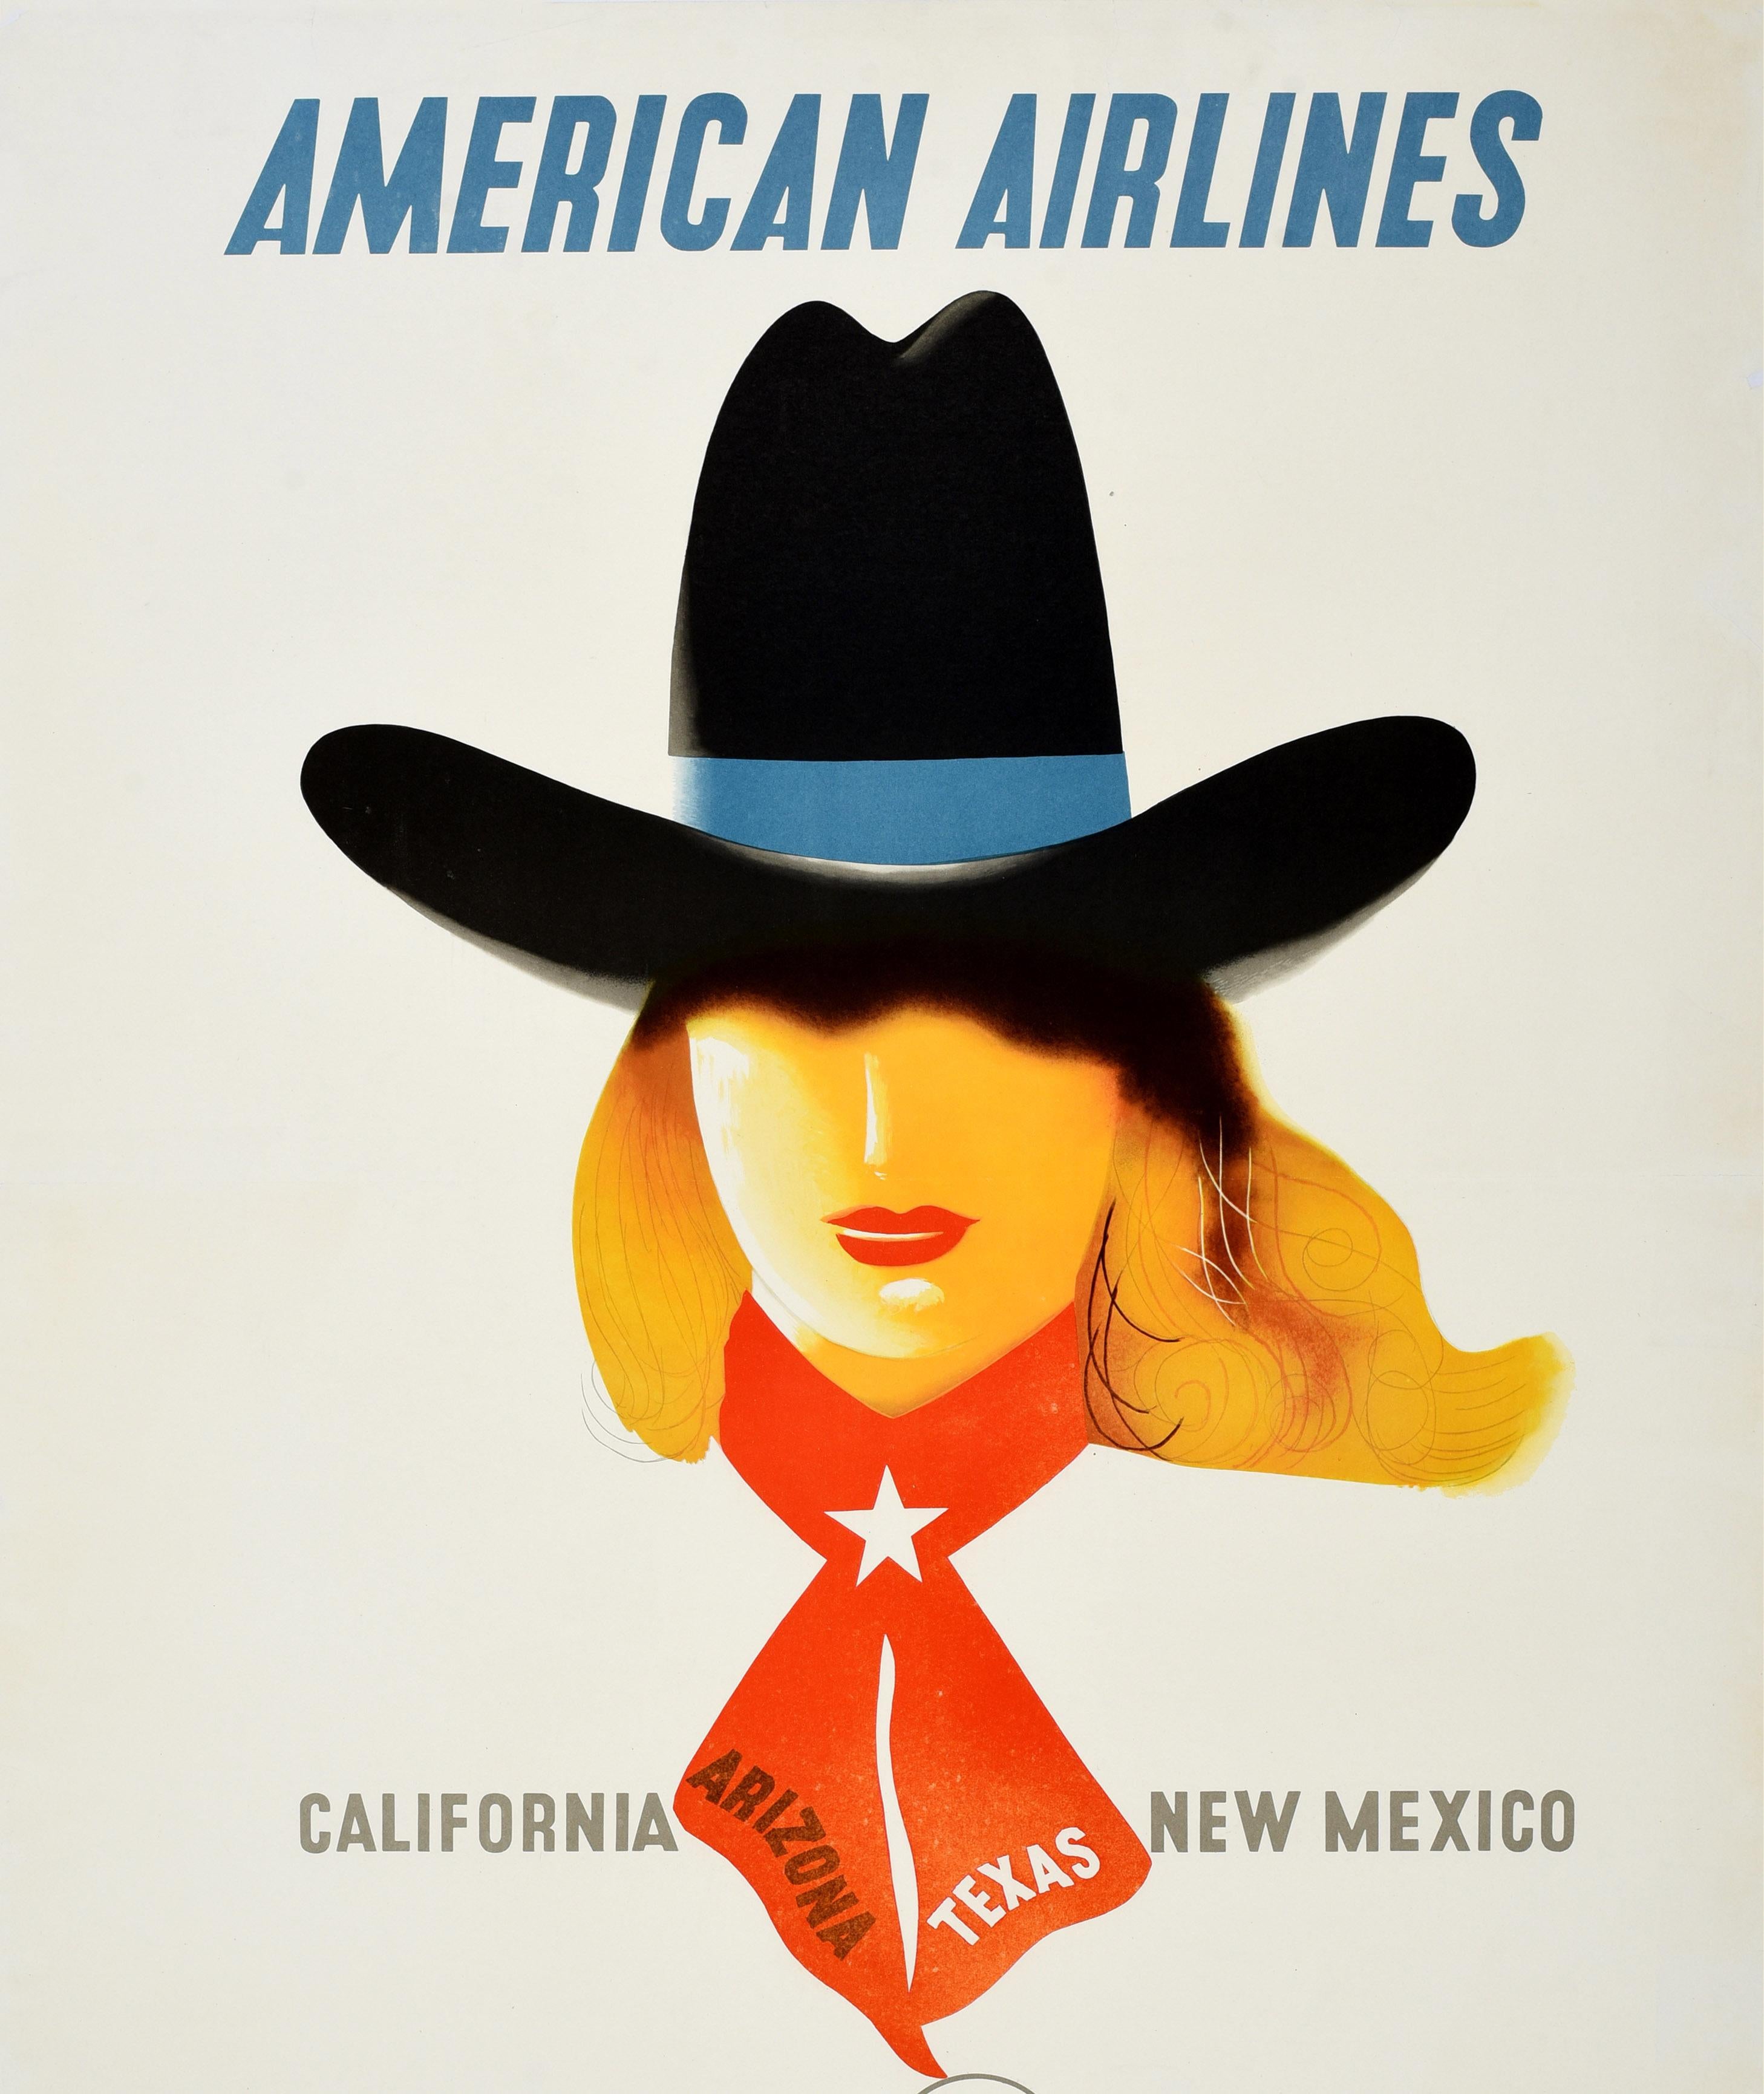 Original vintage travel poster advertising American Airlines flights to California Arizona Texas New Mexico featuring a colourful stylised design by one of the most renowned poster artists of the 20th century Edward McKnight Kauffer (1890-1954),